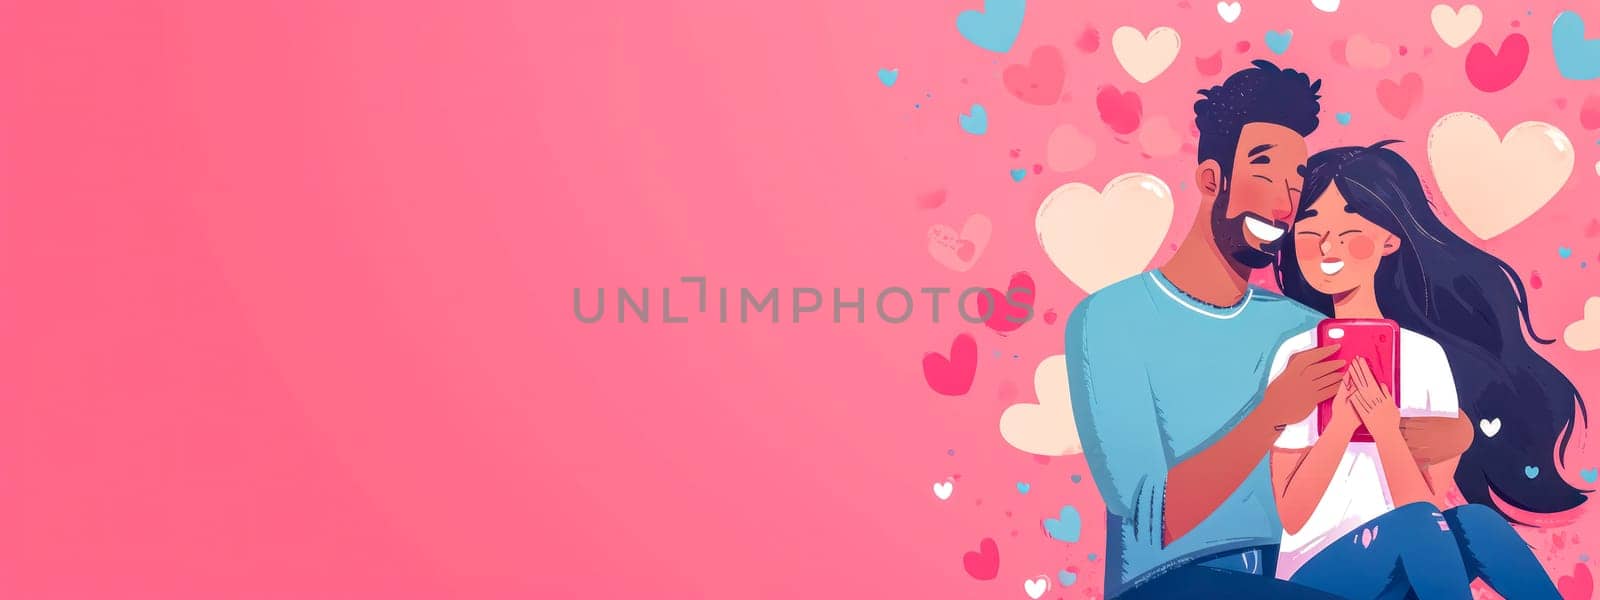 couple sharing a moment with a smartphone, surrounded by hearts on a pink background, capturing the essence of modern love and connection in the digital age. banner with copy space